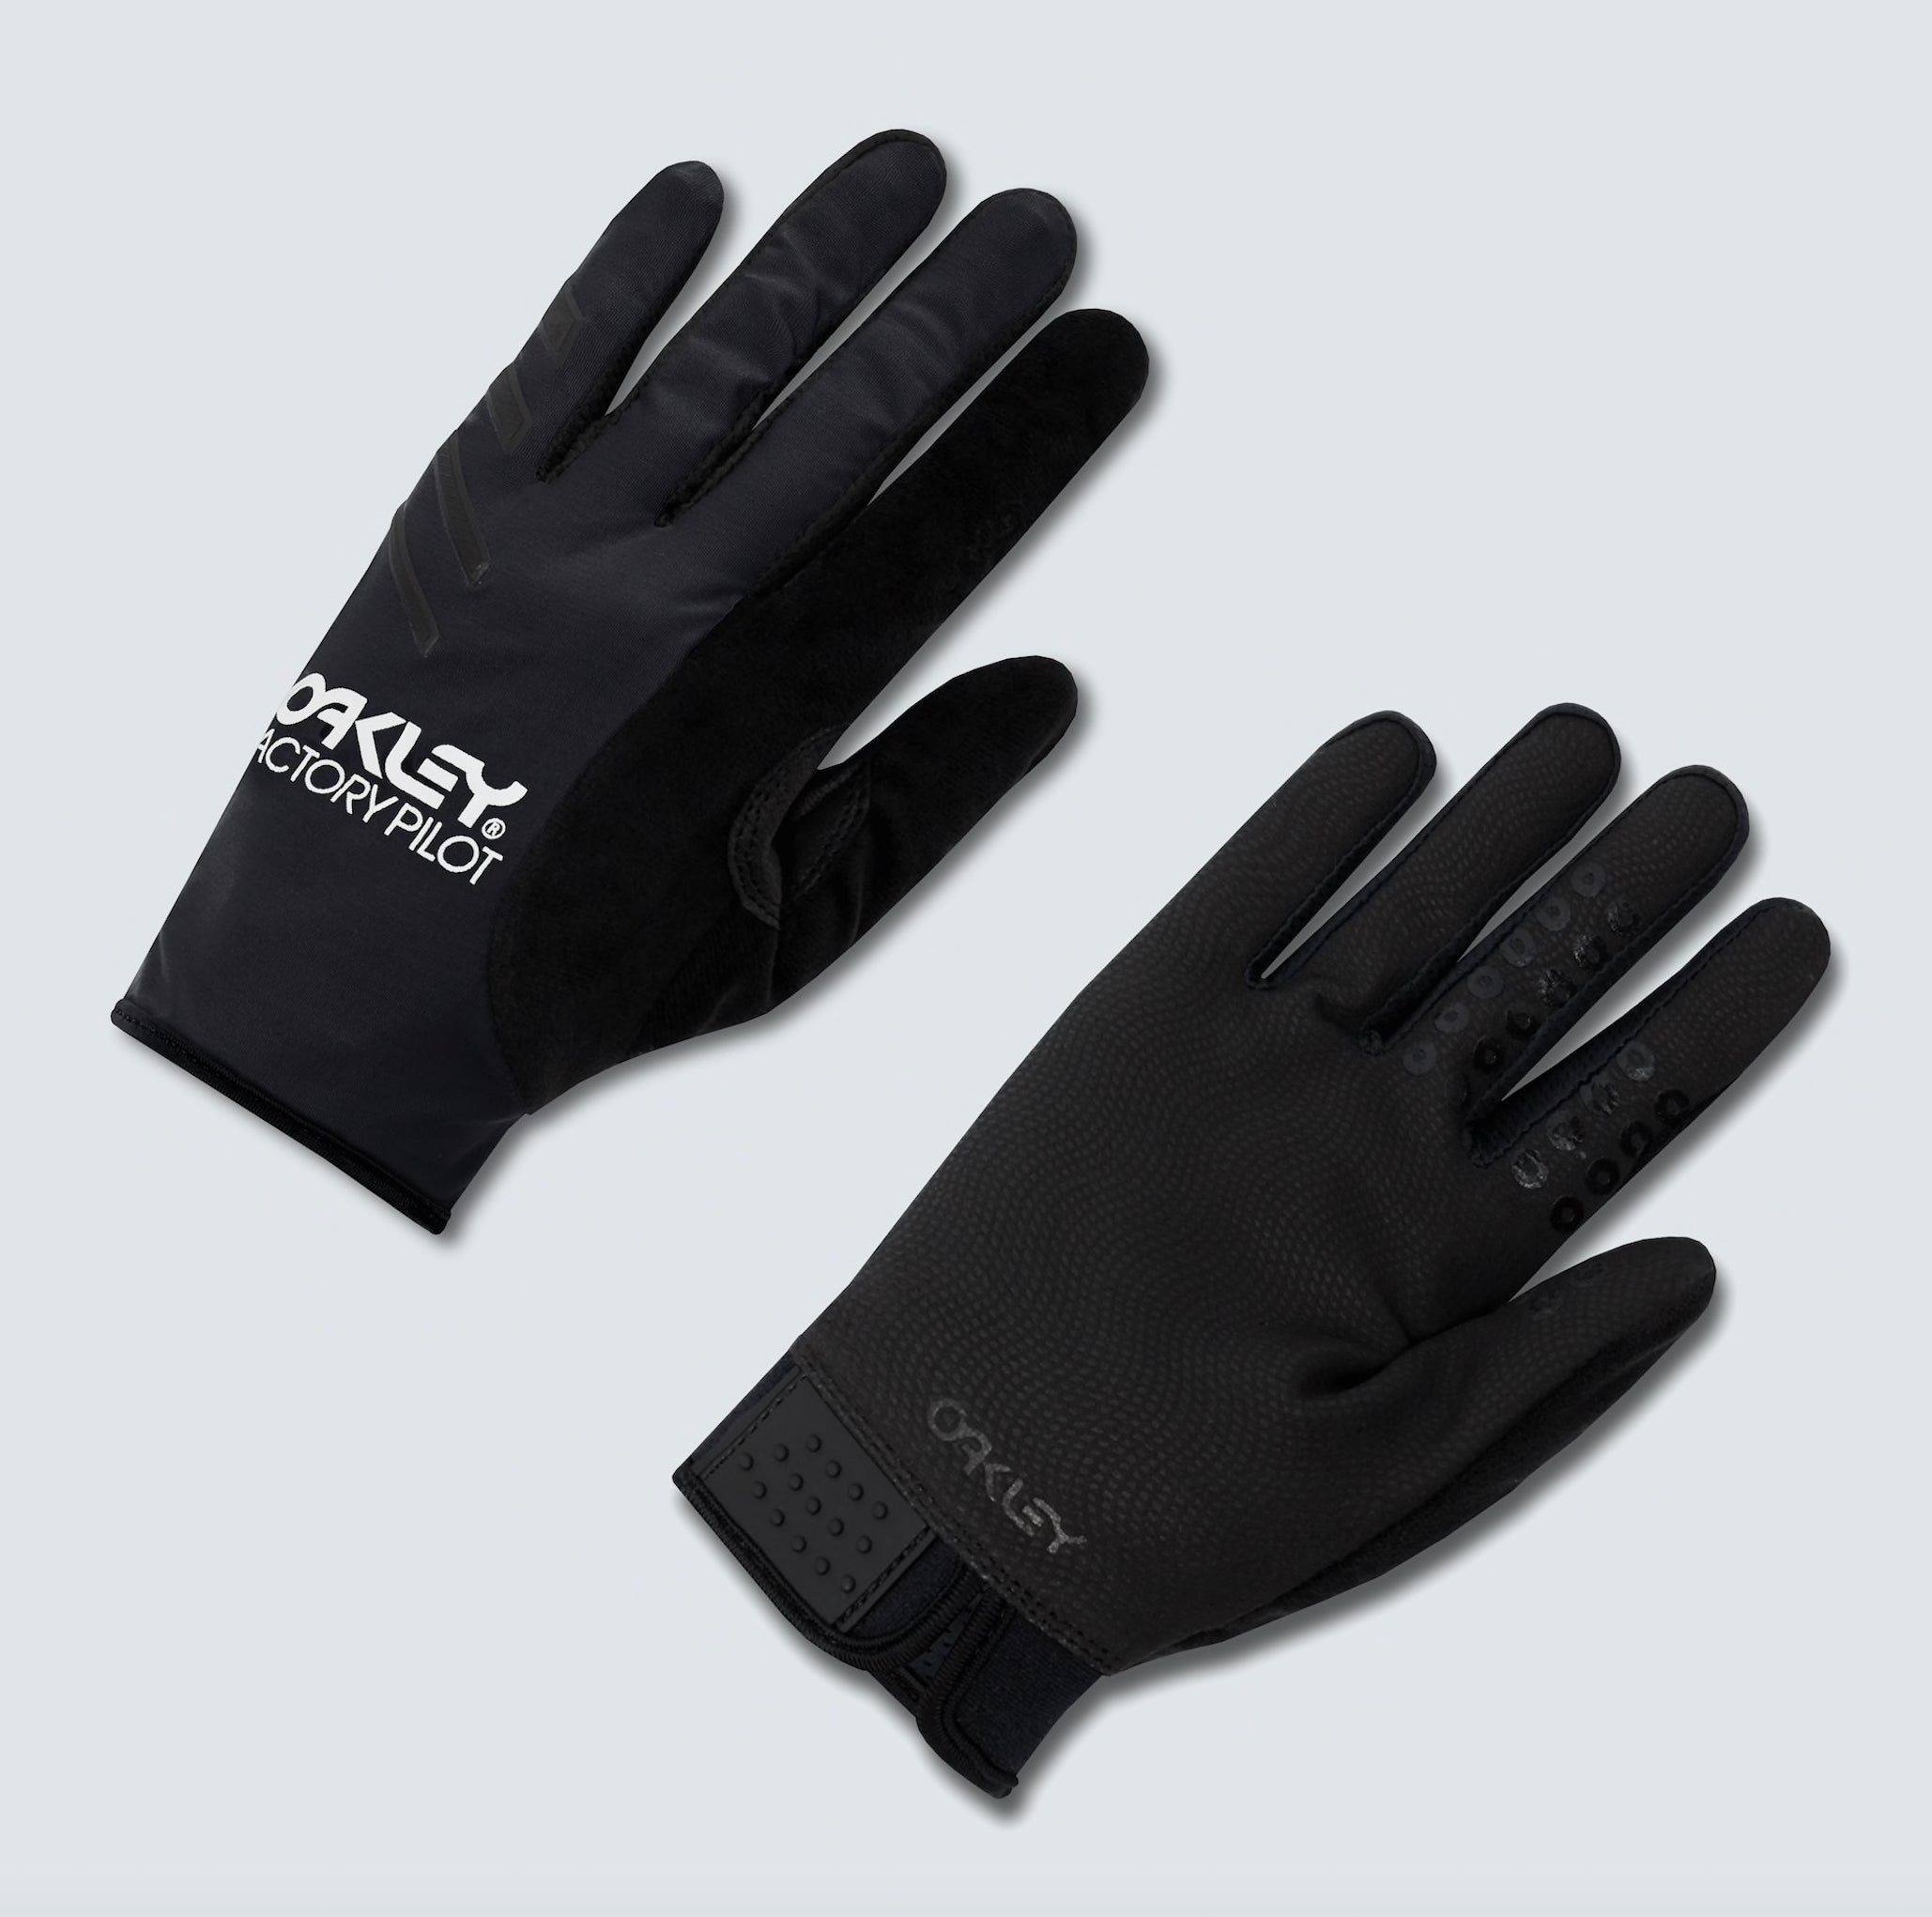 Oakley All Conditions Gloves - Blackout